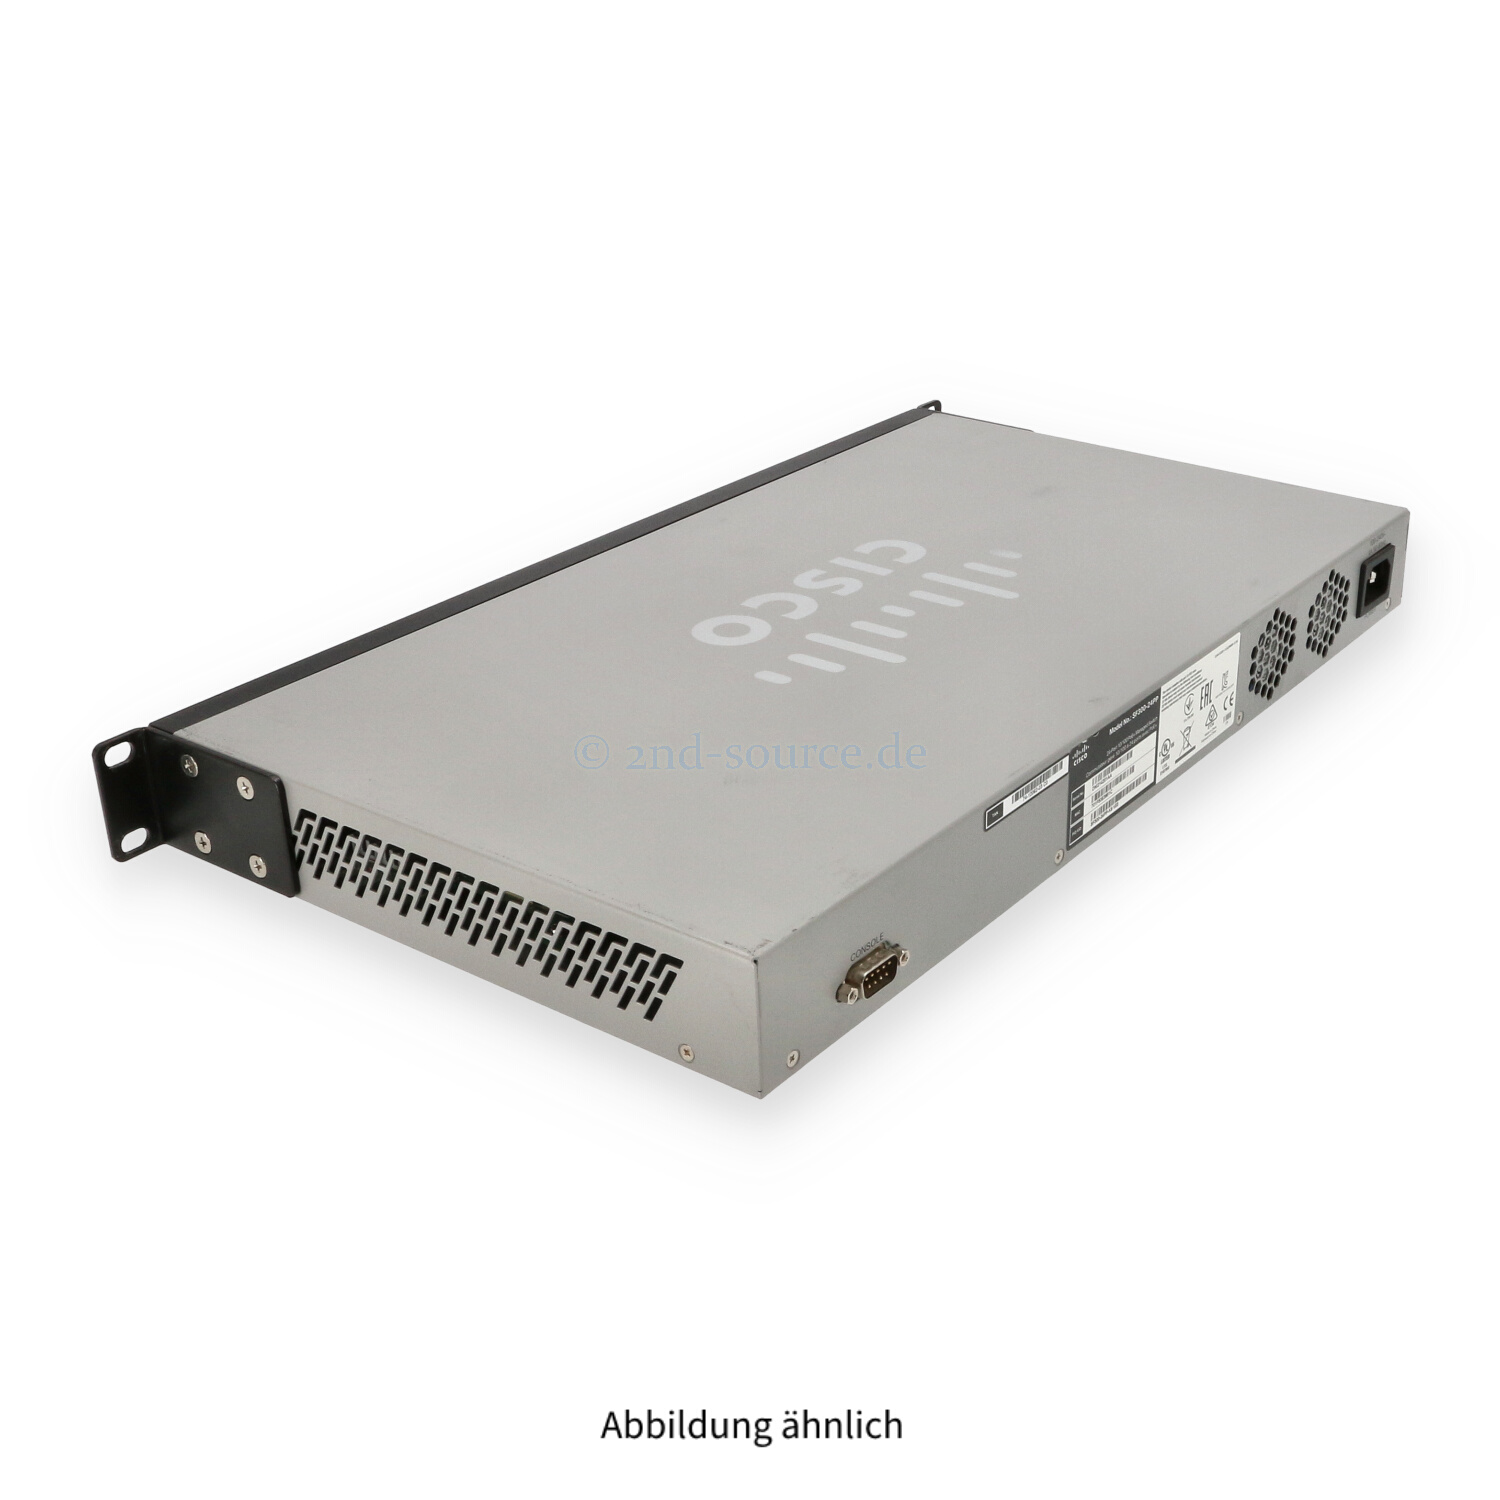 Cisco SF300-24PP 24x 10/100Base-T PoE+ 2x 1GbE 2x Shared SFP 1GbE Managed Switch SF300-24PP-K9